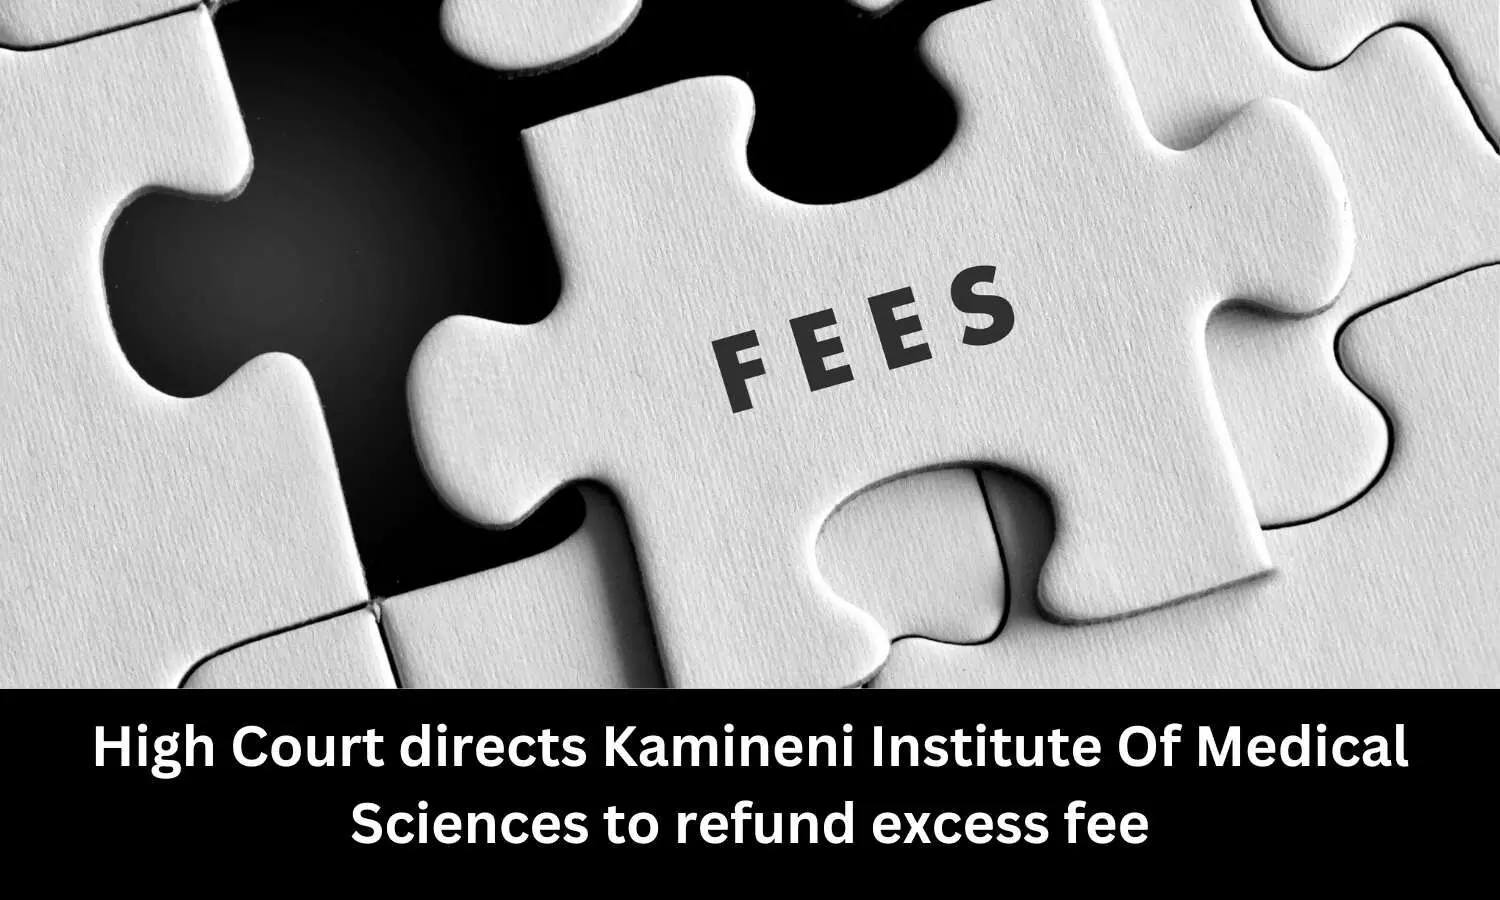 Refund excess fee: High Court directs Kamineni Institute of Medical Sciences